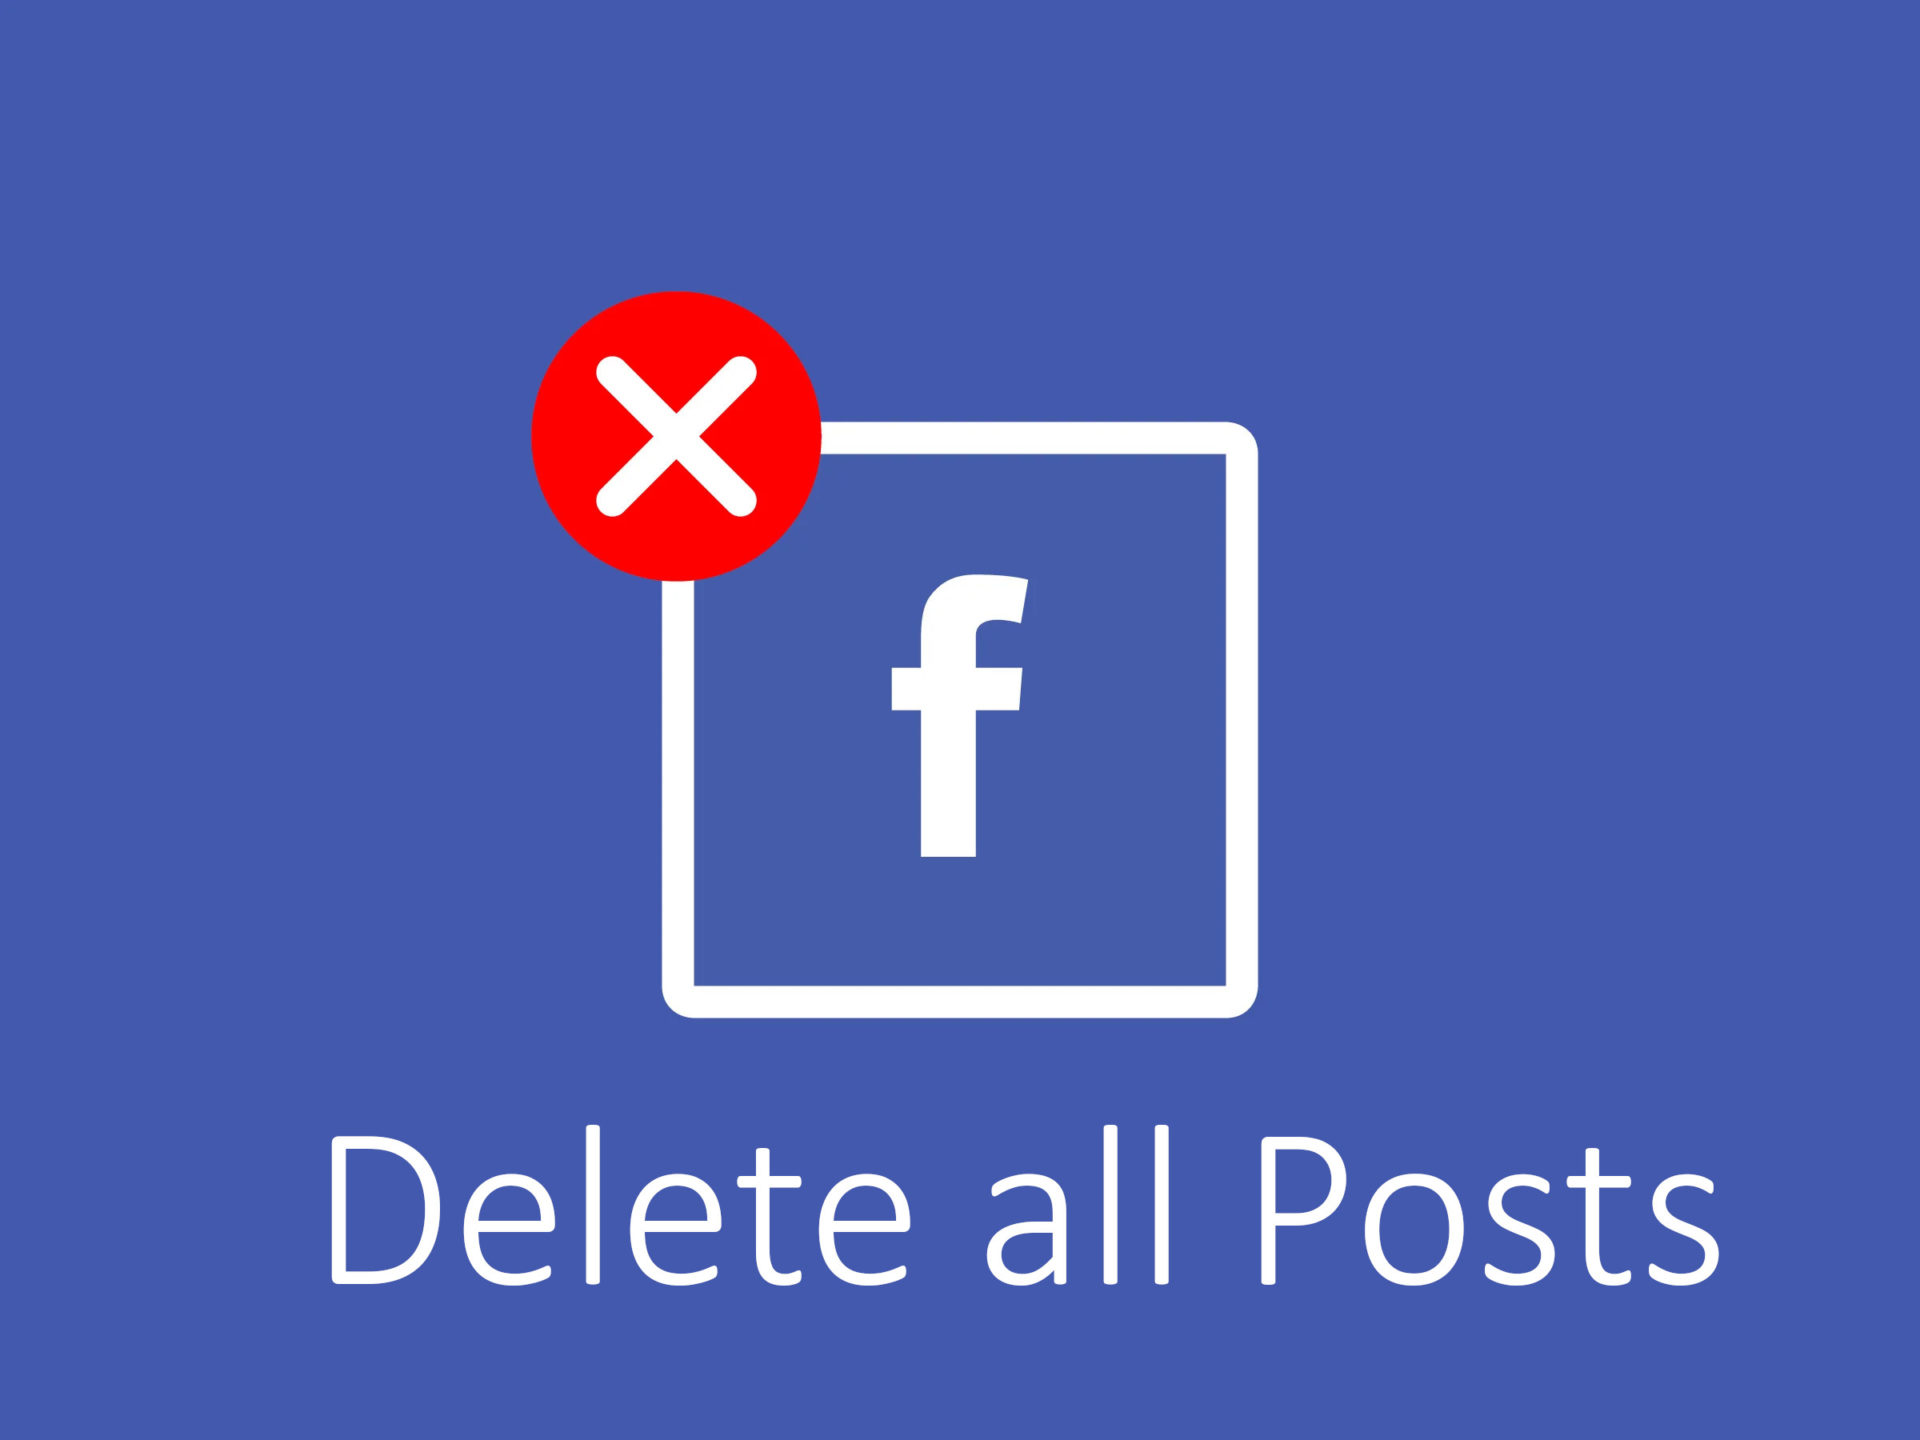 How to delete all posts on Facebook